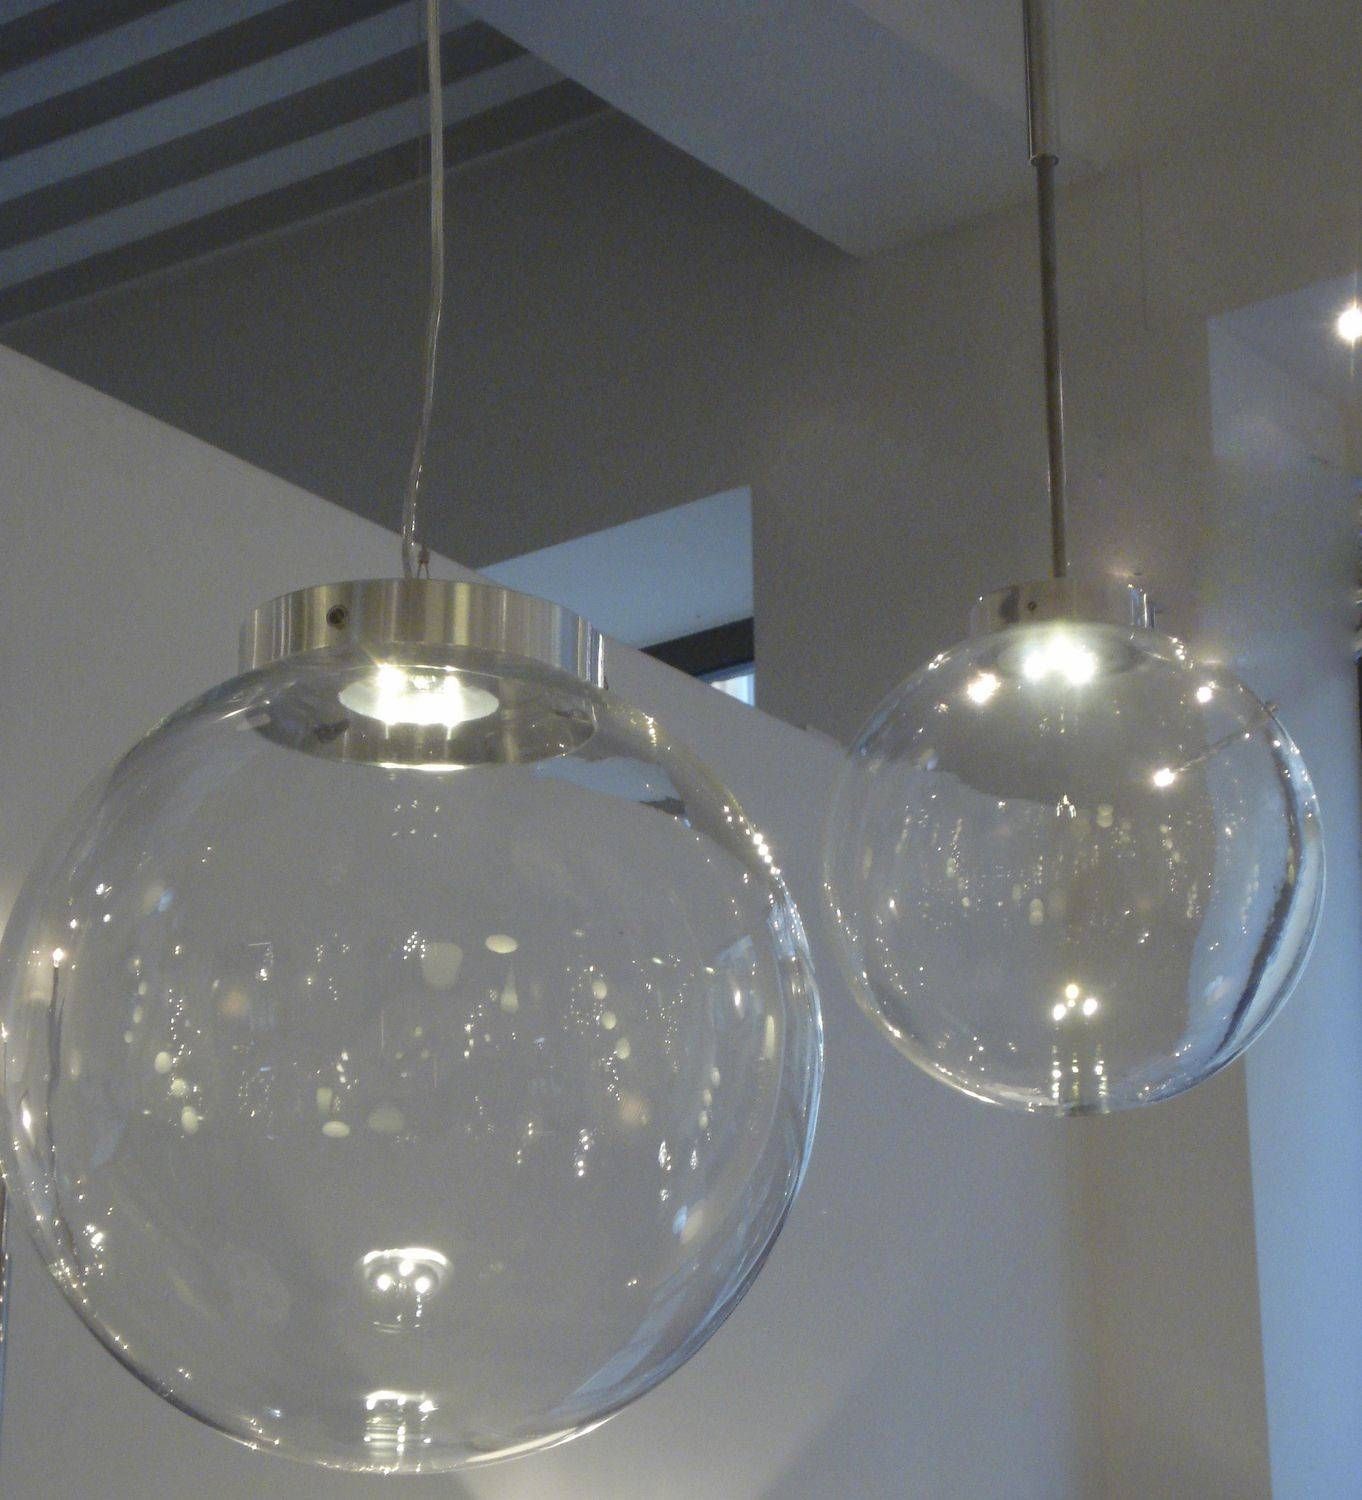 Ceiling Lights : Astounding Hand Blown Ceiling Lights Stained Regarding Hand Blown Lights Fixtures (View 13 of 15)